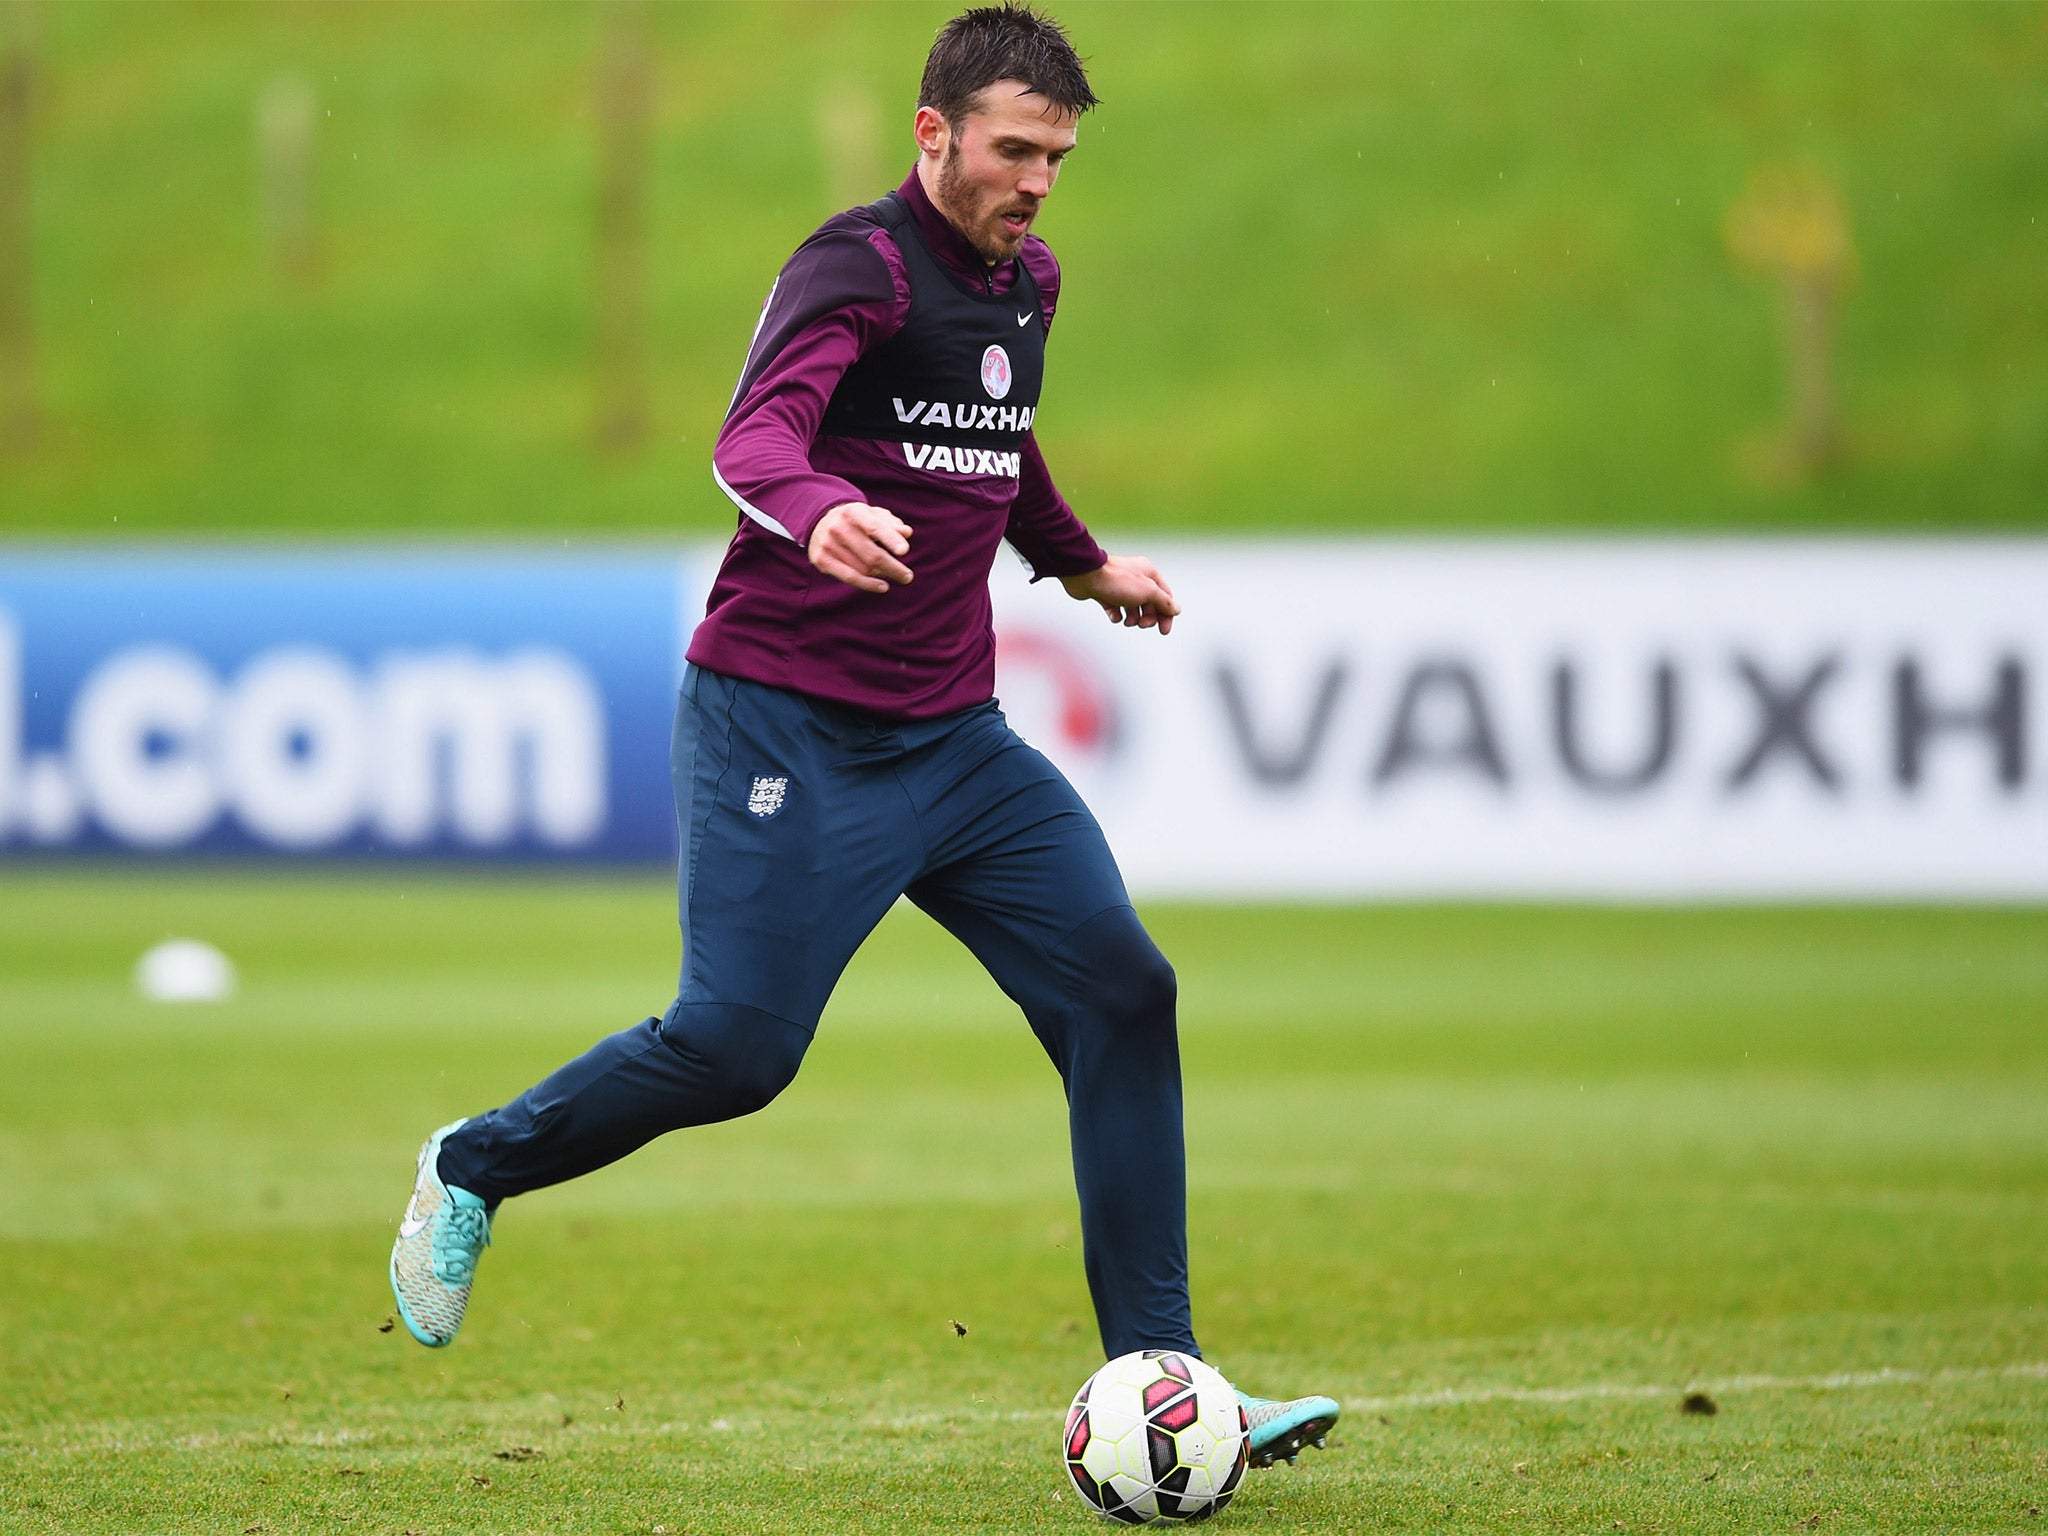 Michael Carrick picked up a groin injury and was forced to withdraw from the England squad